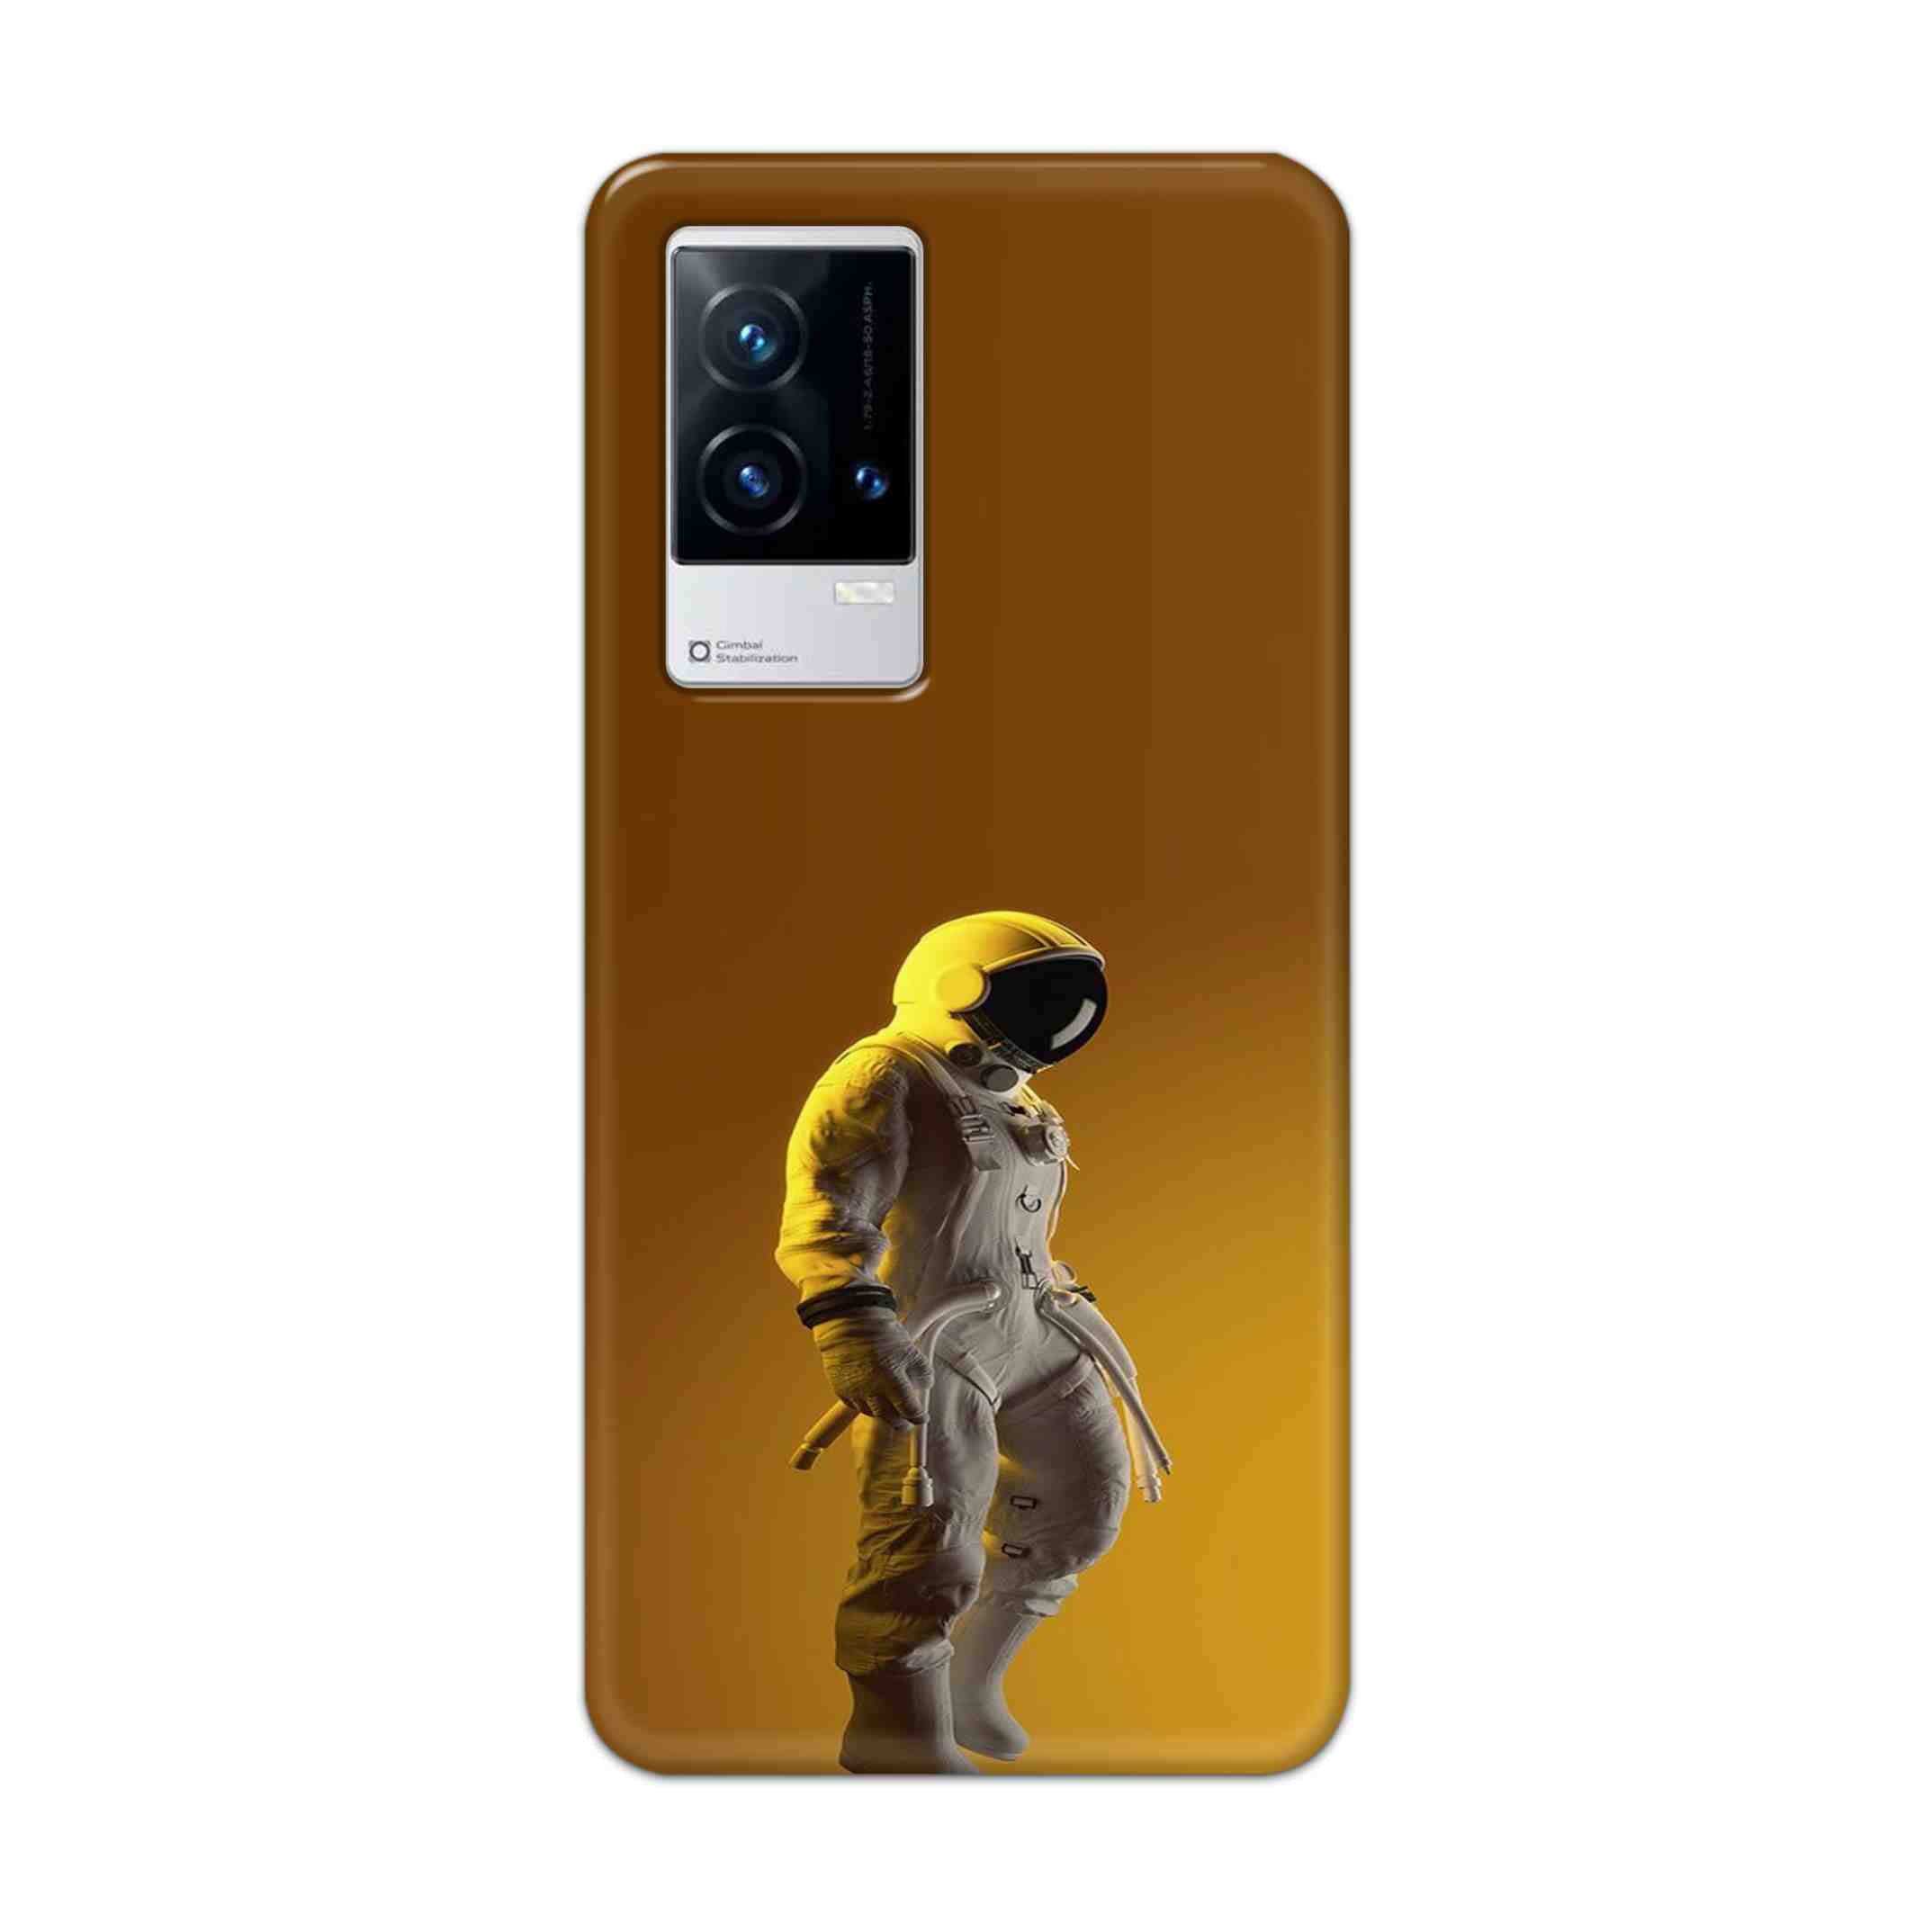 Buy Yellow Astronaut Hard Back Mobile Phone Case Cover For Vivo iQOO 9 5G Online